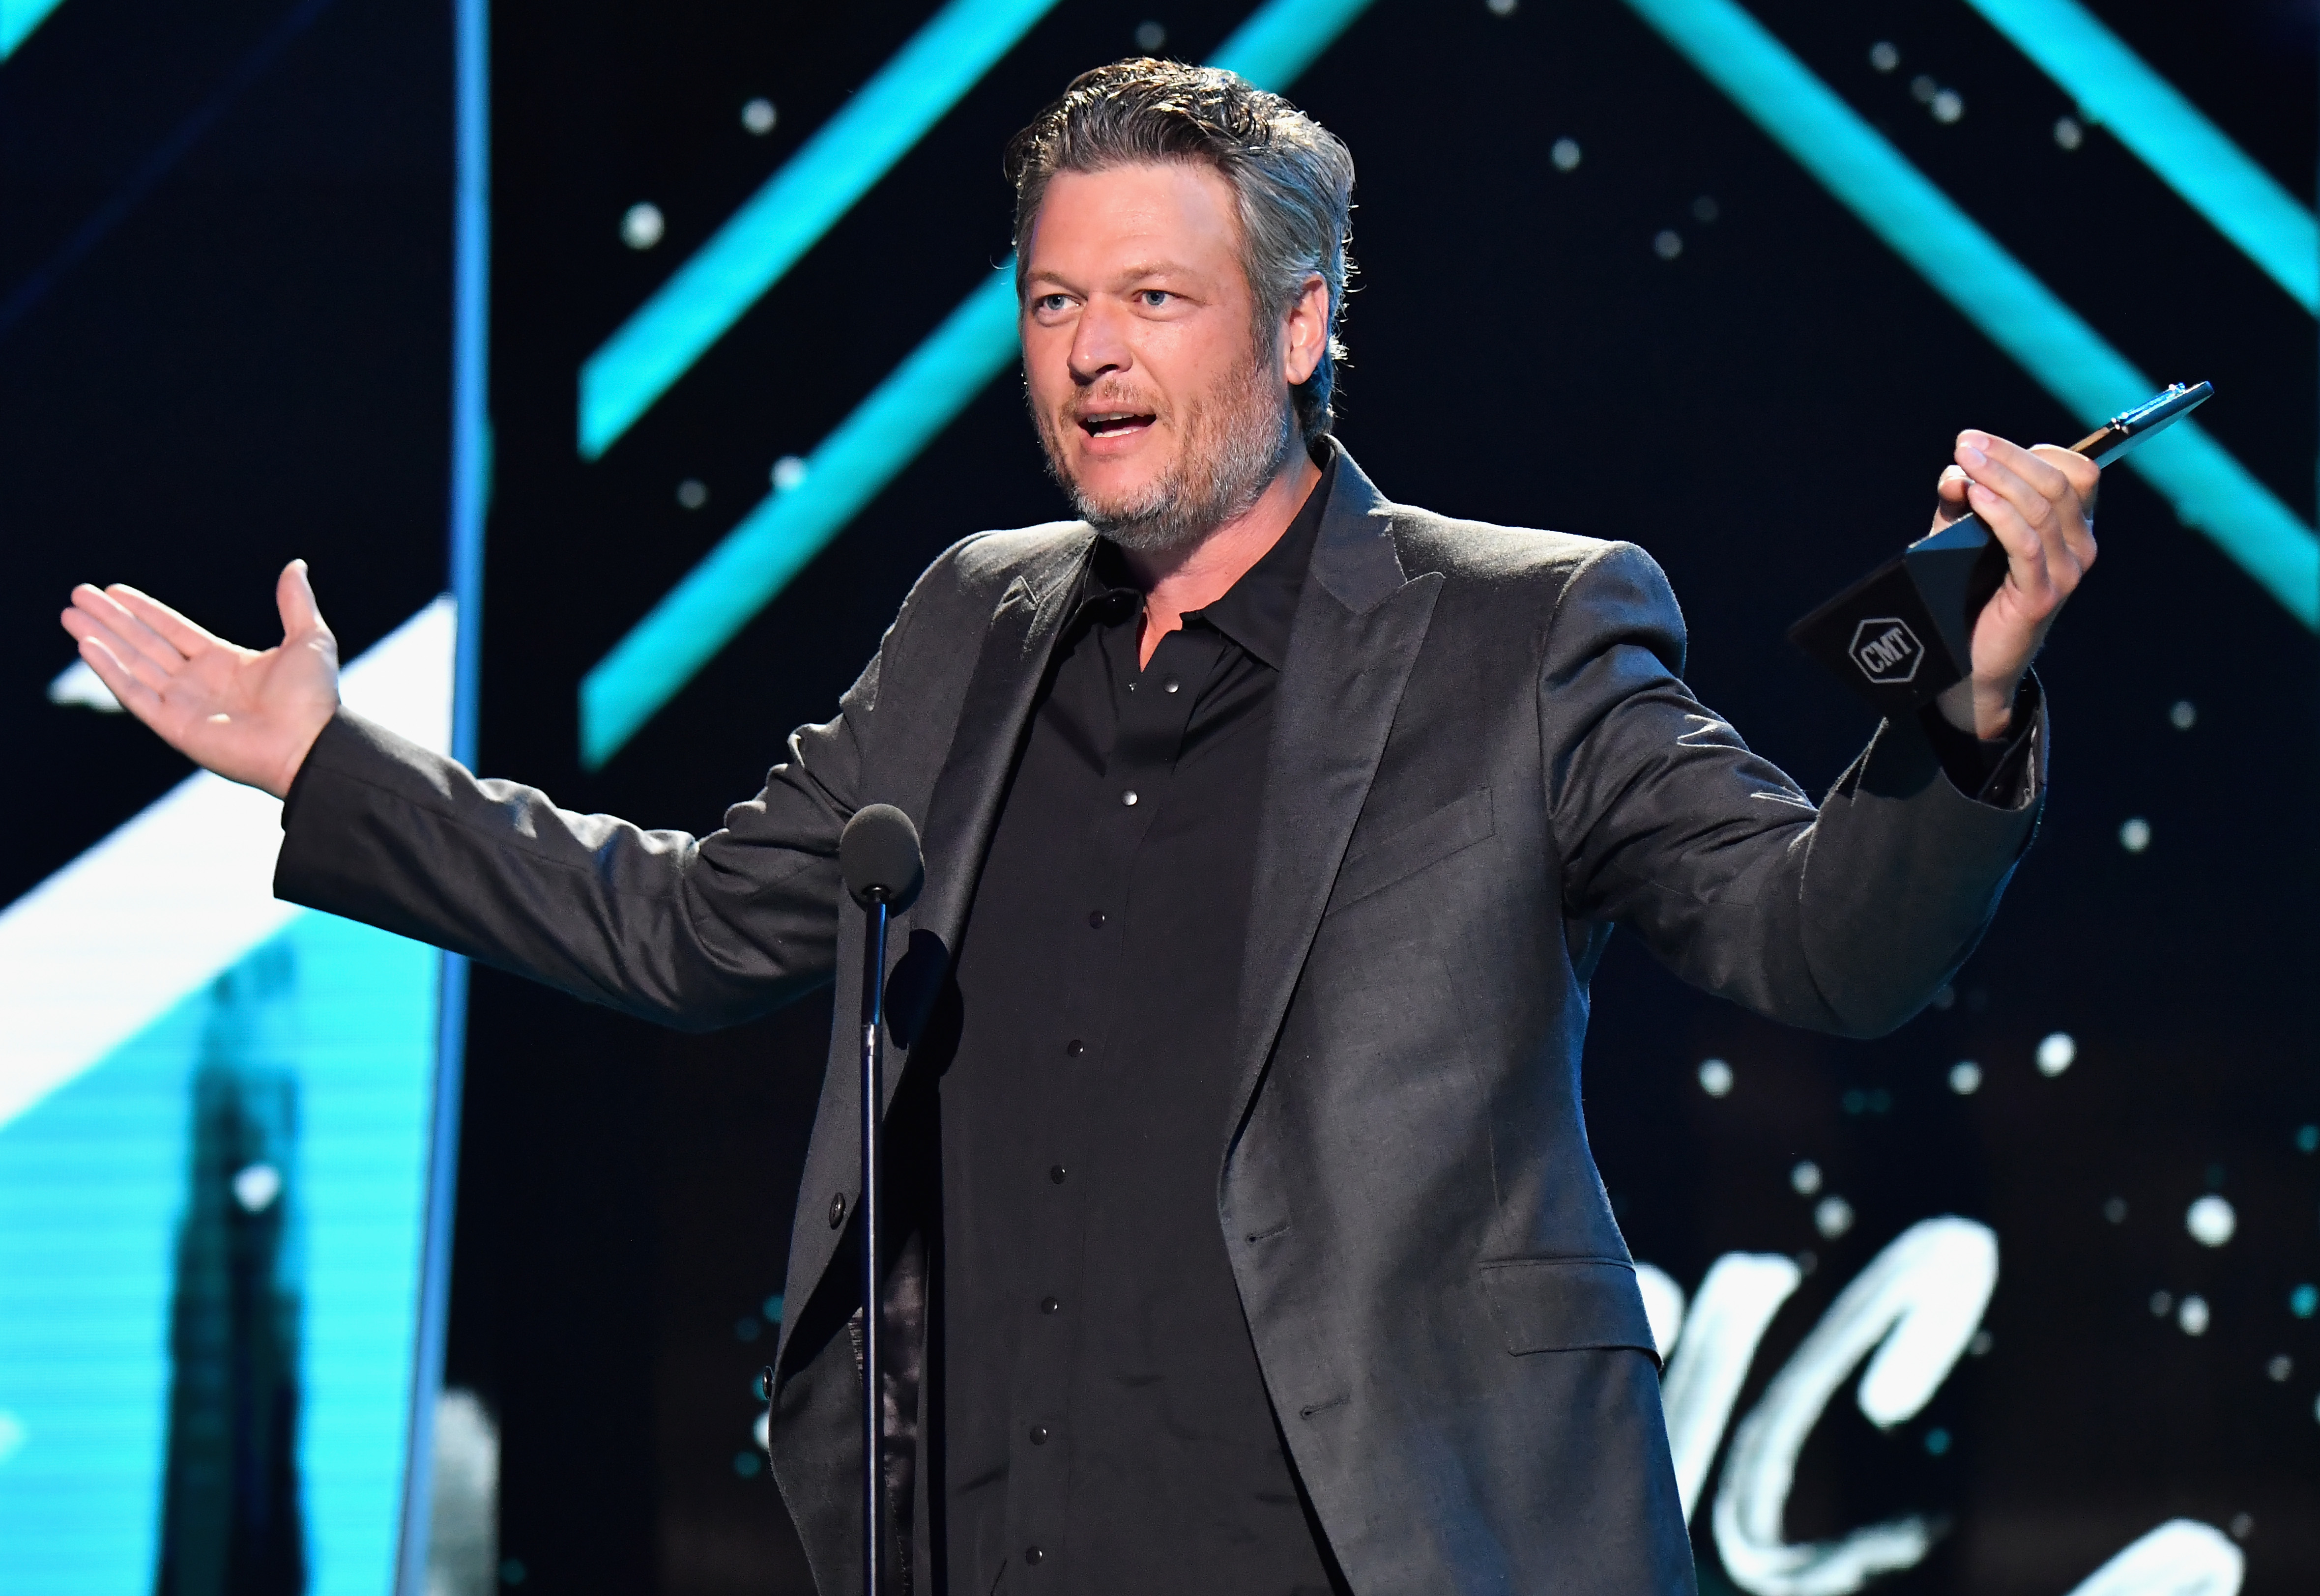 Blake Shelton speaks onstage at the CMT Music Awards in Nashville, Tennessee, on June 6, 2018 | Source: Getty Images